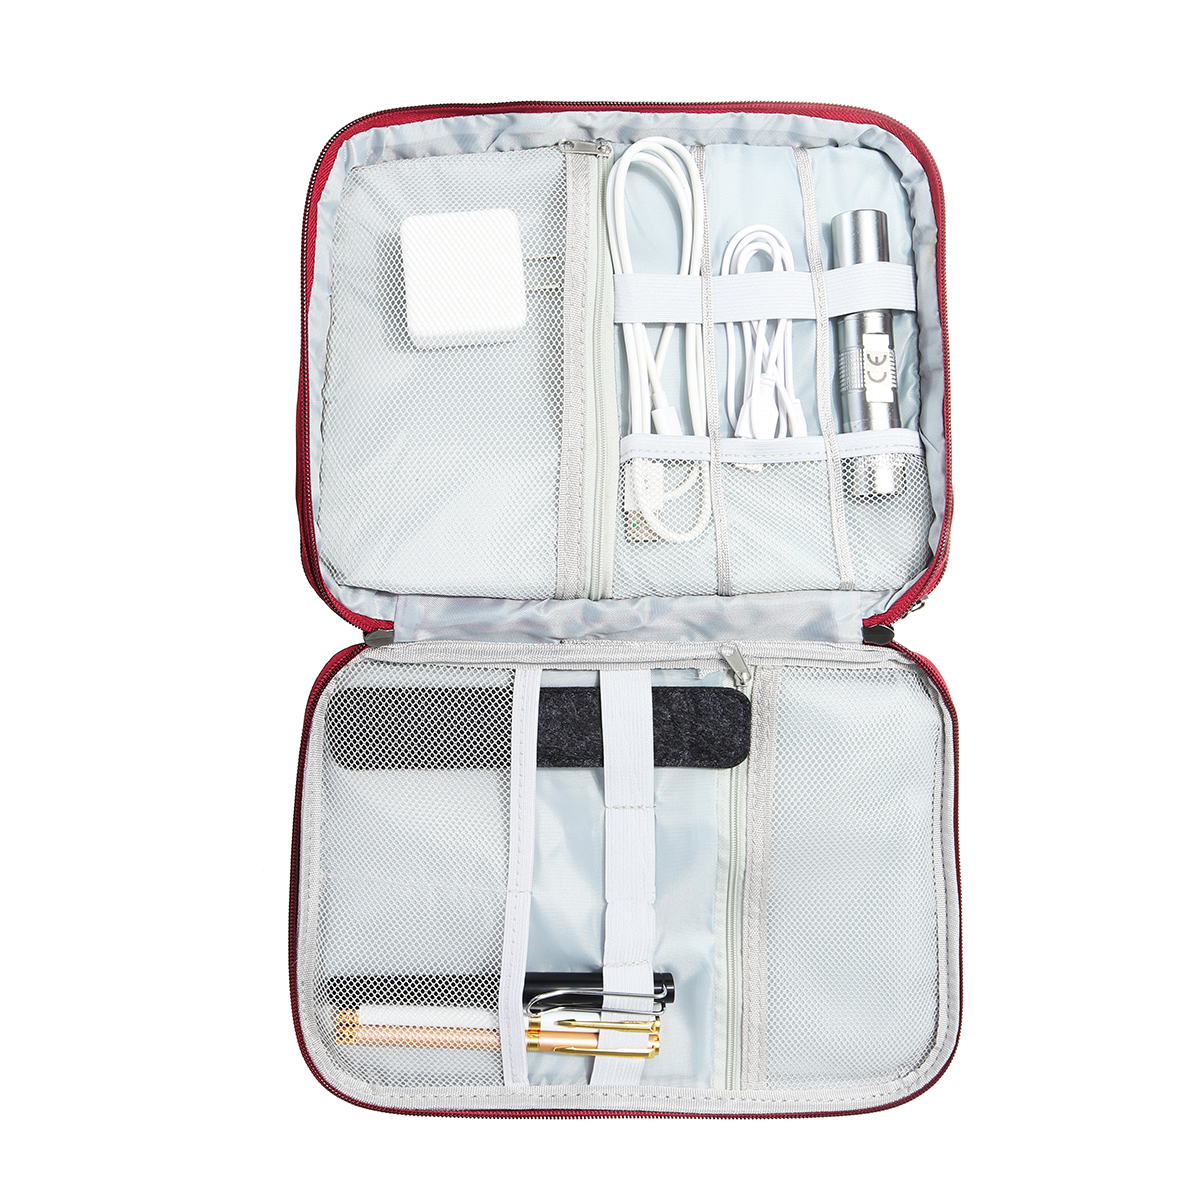 Data-Cable-Storage-Bag-Multifunctional-Digital-Devices-Stationery-Case-Portable-Travel-Electronic-Po-1782315-13